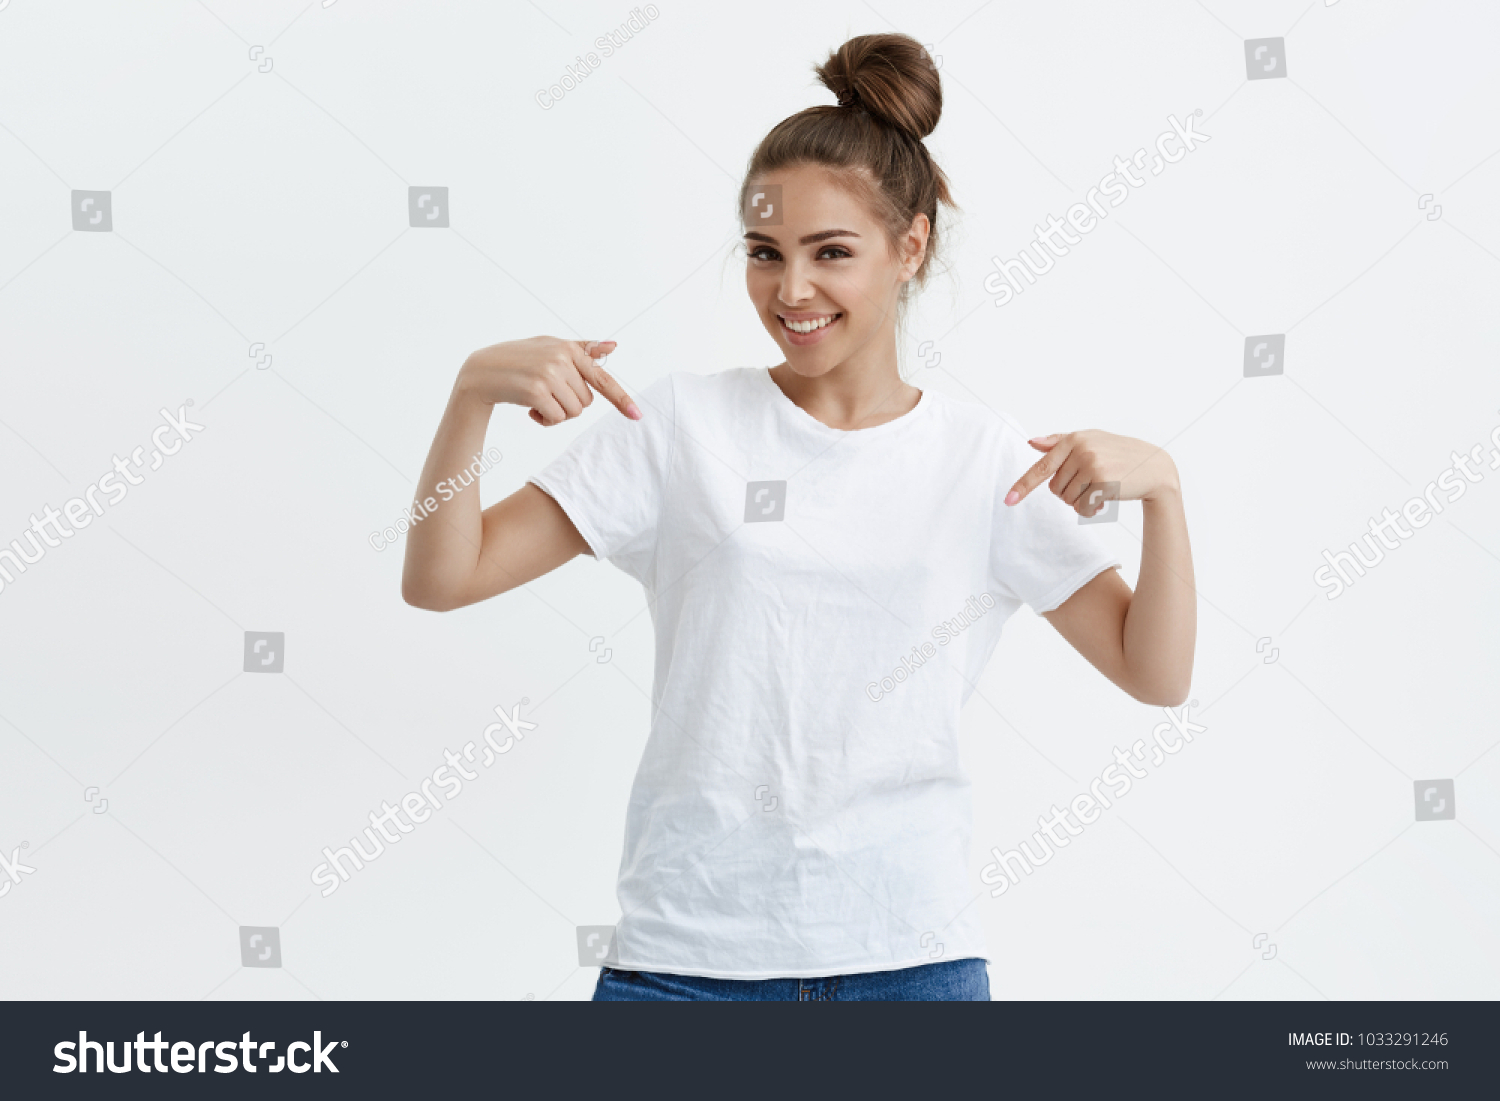 Charming emotive caucasian woman pointing down or at her t-shirt while smiling joyfully and expressing positive emotions over white background. Girl trained a lot, she wants to show her muscles #1033291246